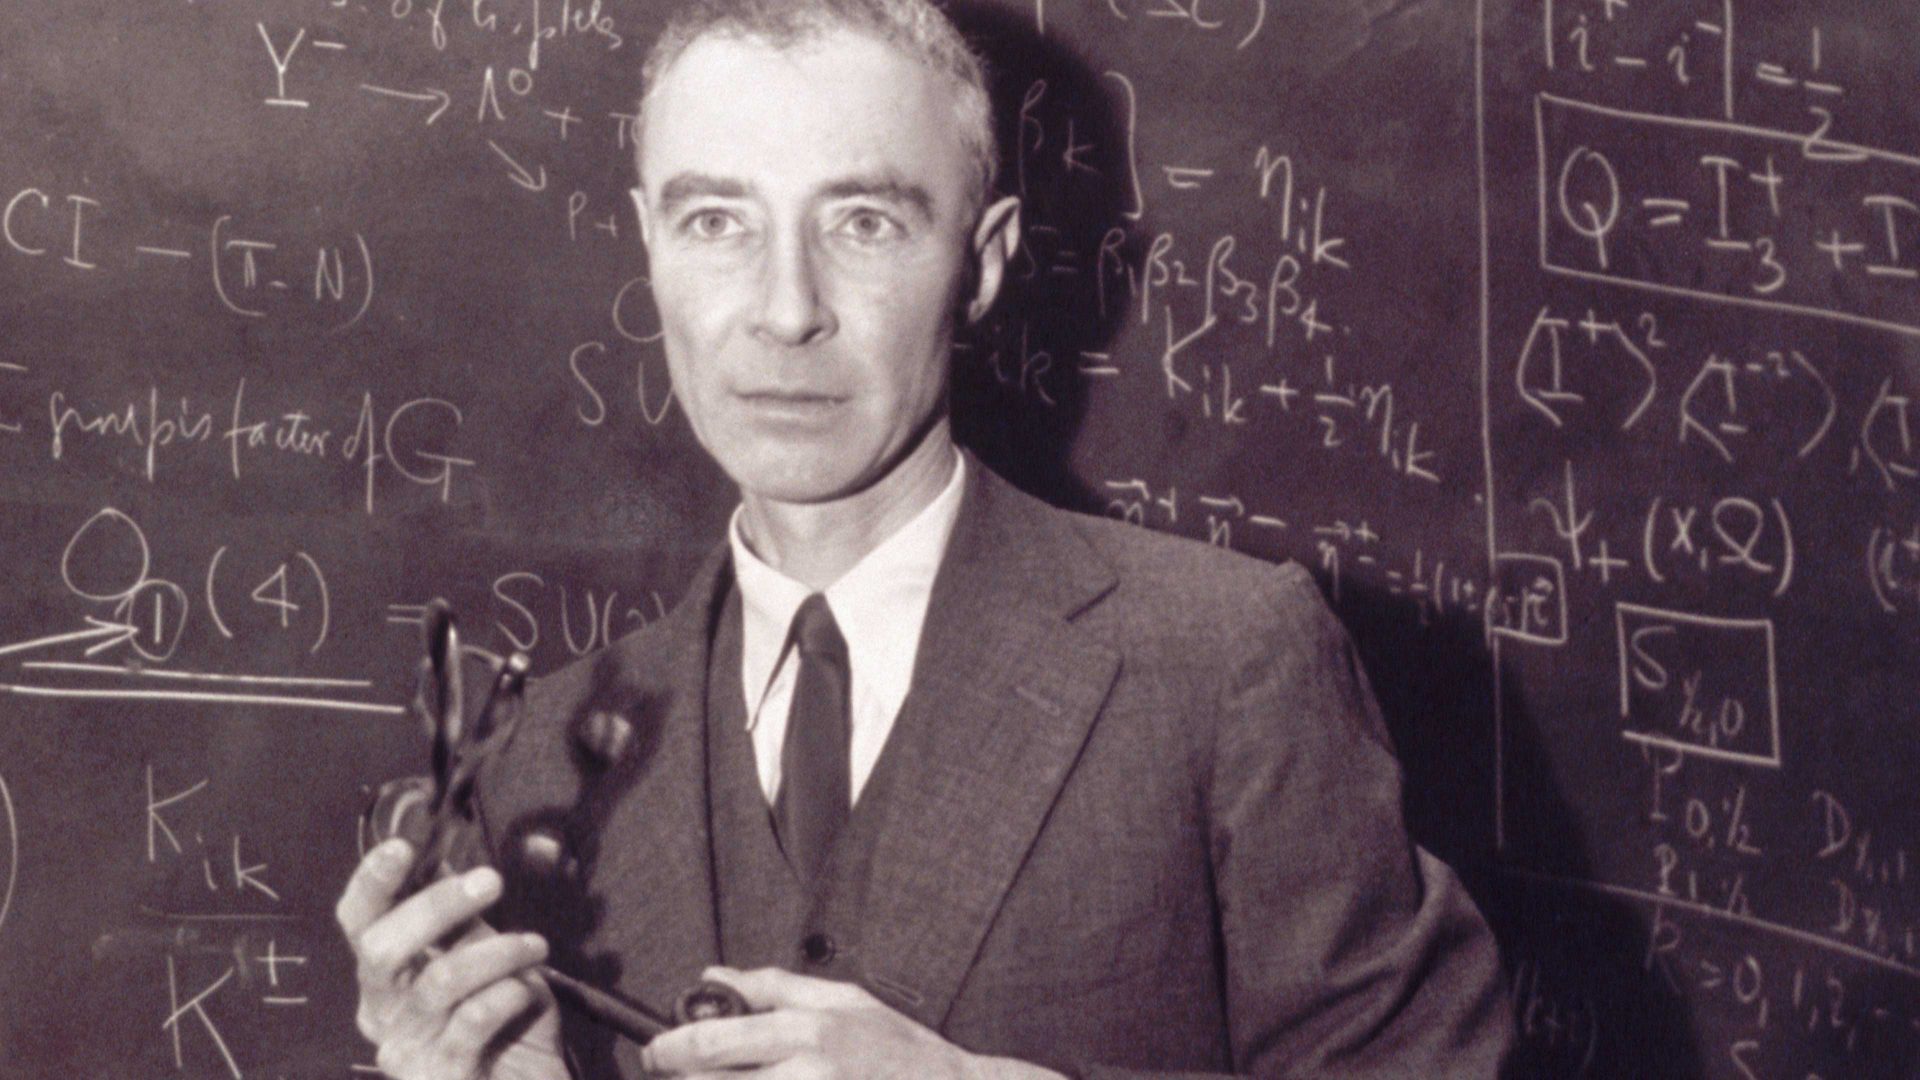 Christopher Nolan’s film about Robert Oppenheimer, above, raises questions for today. Photo: Bettmann Archive/Getty